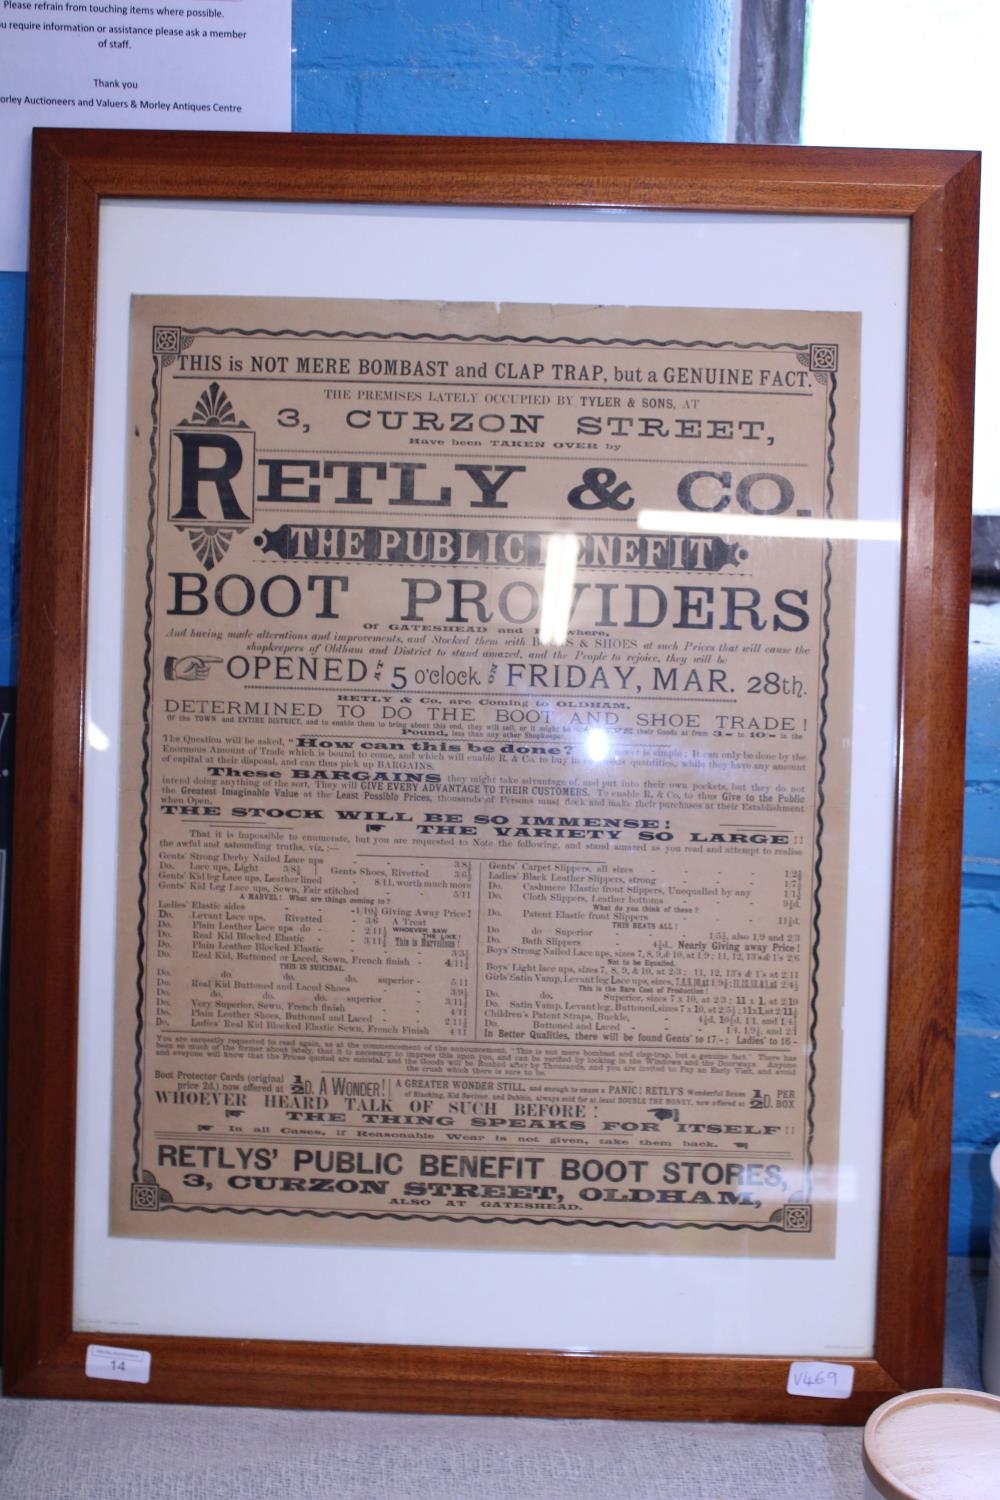 A original framed Victorian advertising poster for Retly & Co. Boot Providers, shipping unavailable